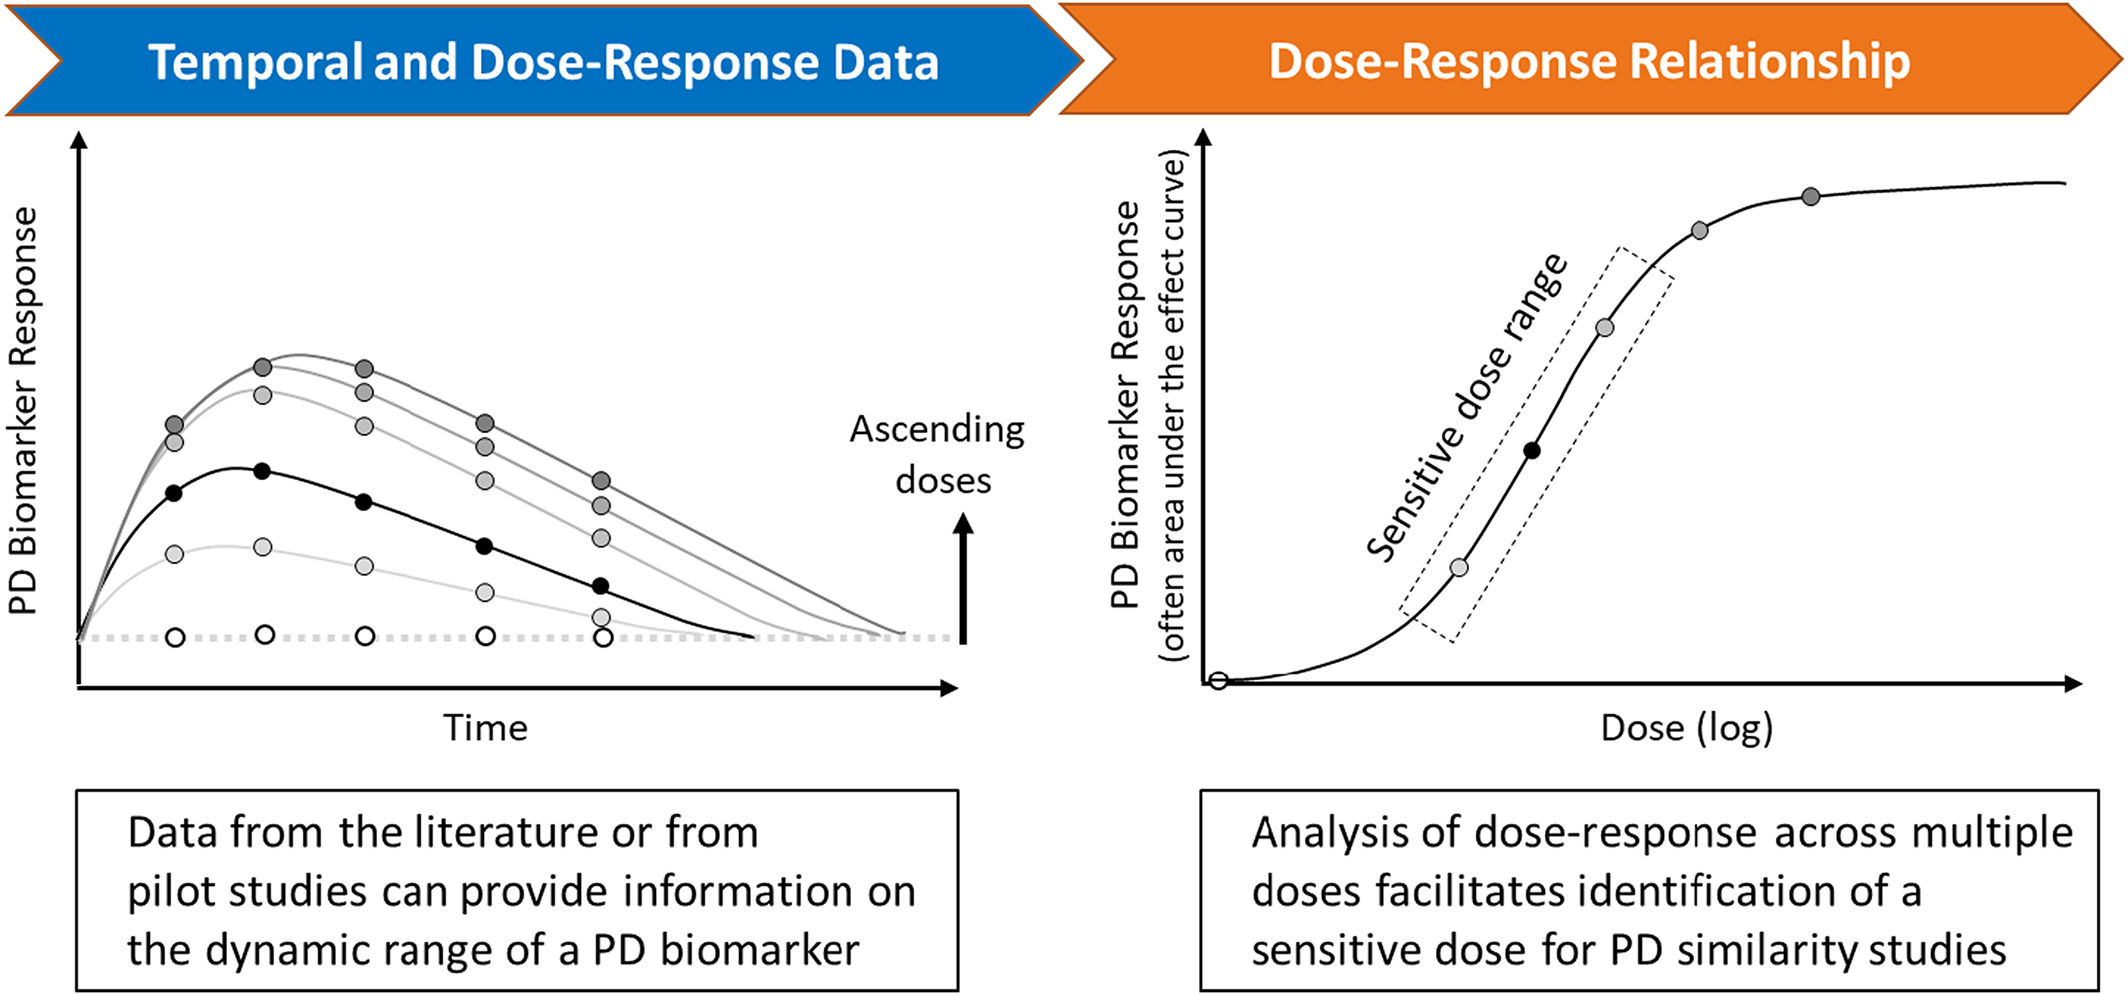 Example temporal and dose—response data for a PD biomarker